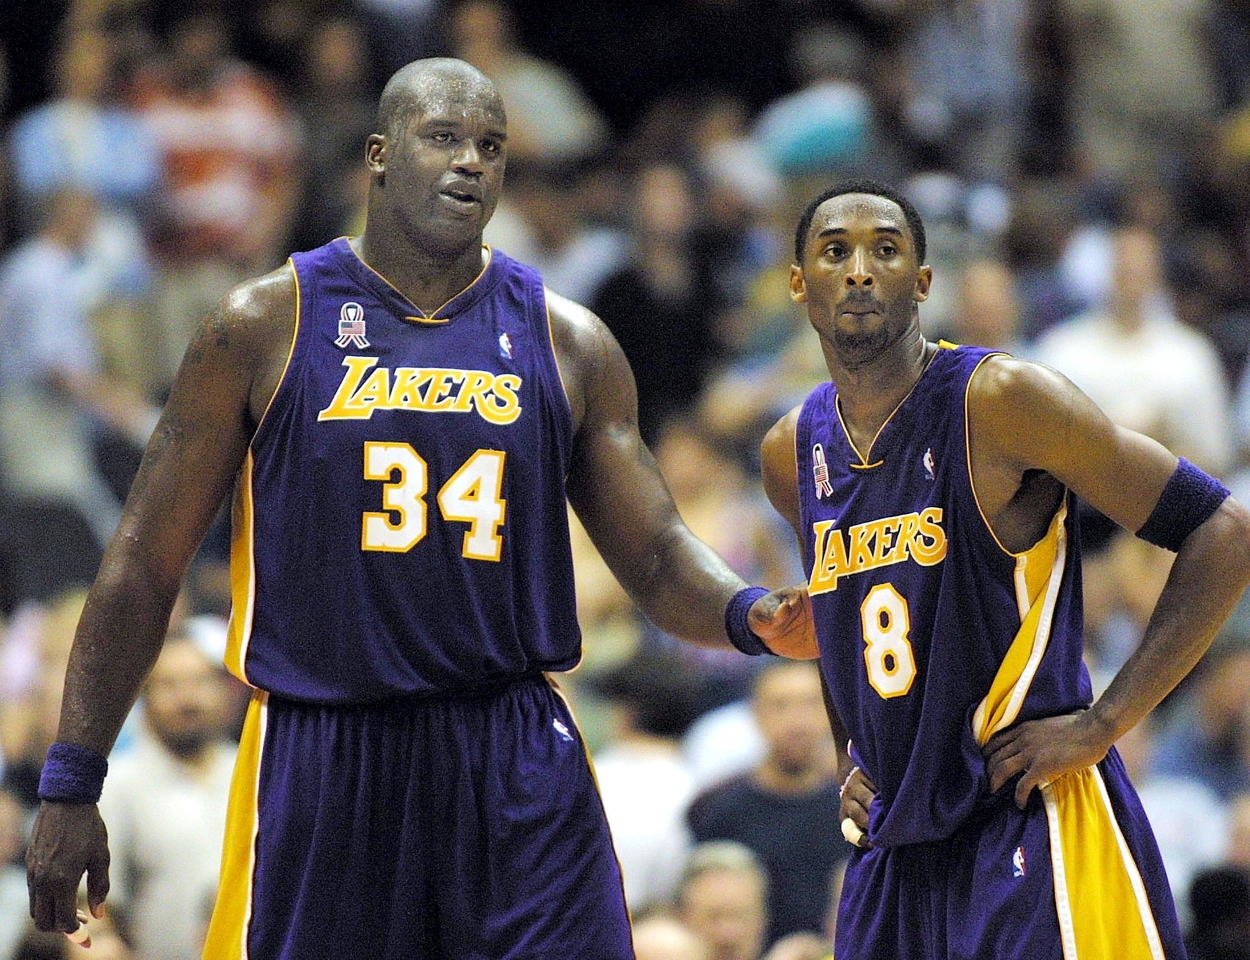 Shaquille O'Neal and Kobe Bryant of the Los Angeles Lakers stand next to each other.